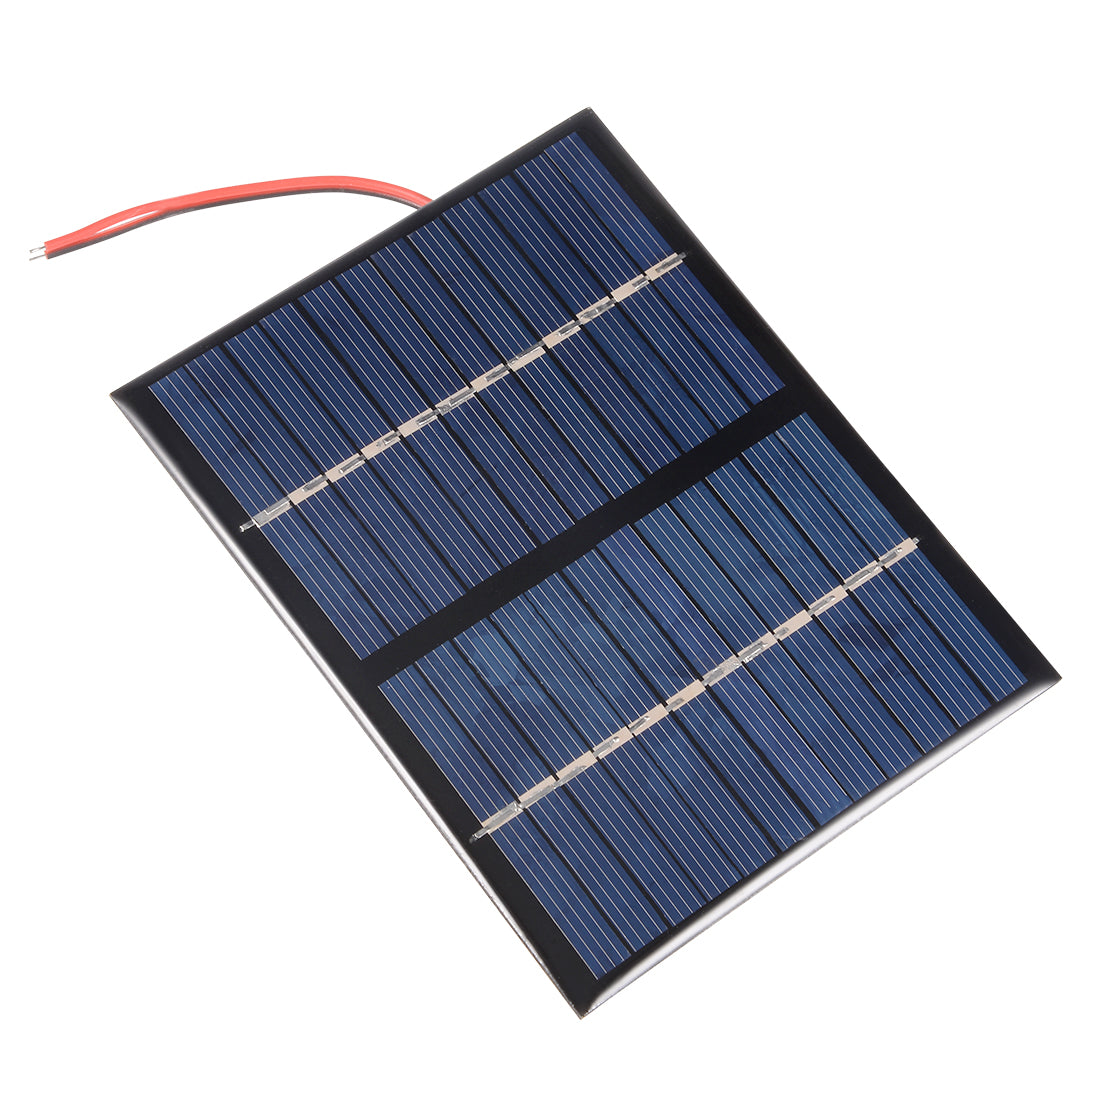 Uxcell Uxcell 1.5W 12V Small Solar Panel Module DIY Polysilicon with 150mm Wire for Toys Charger